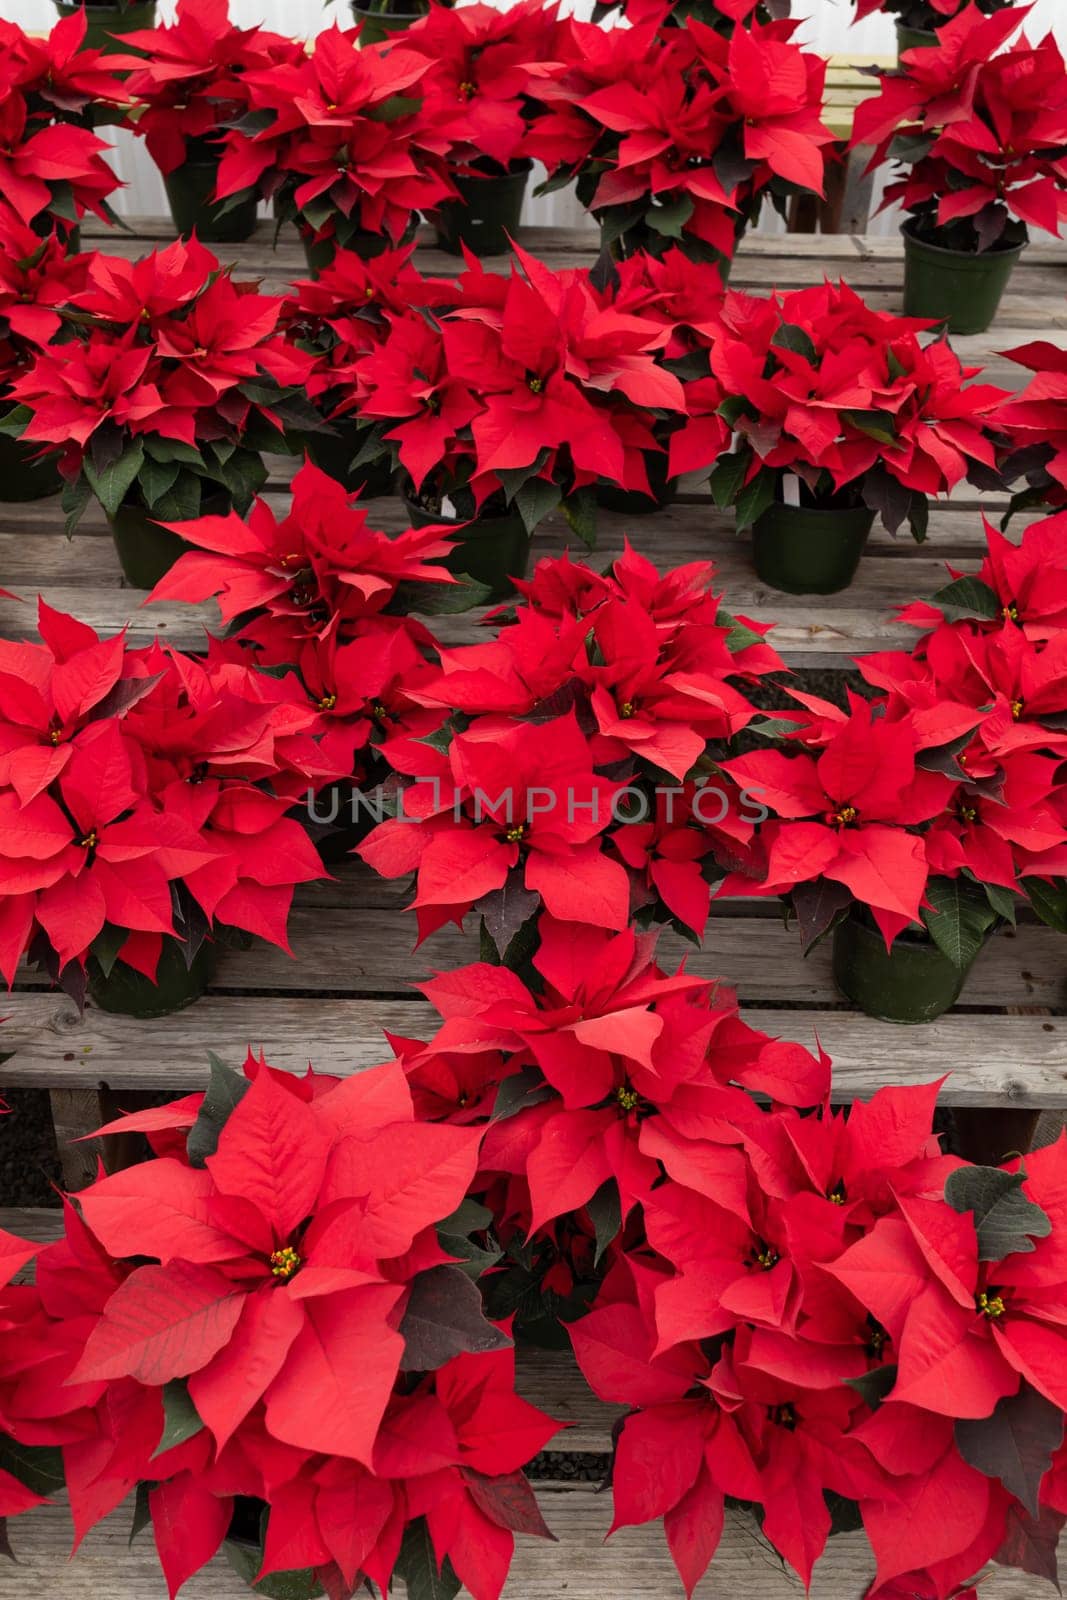 ManyRed Striking Poinsettia Flower, With Star-shaped Red Leaves, Christmas Eve Flower, Flor De Nochebuena. Tropical Shrub. Vertical Backdrop. National Poinsettia Day Celebration. by netatsi